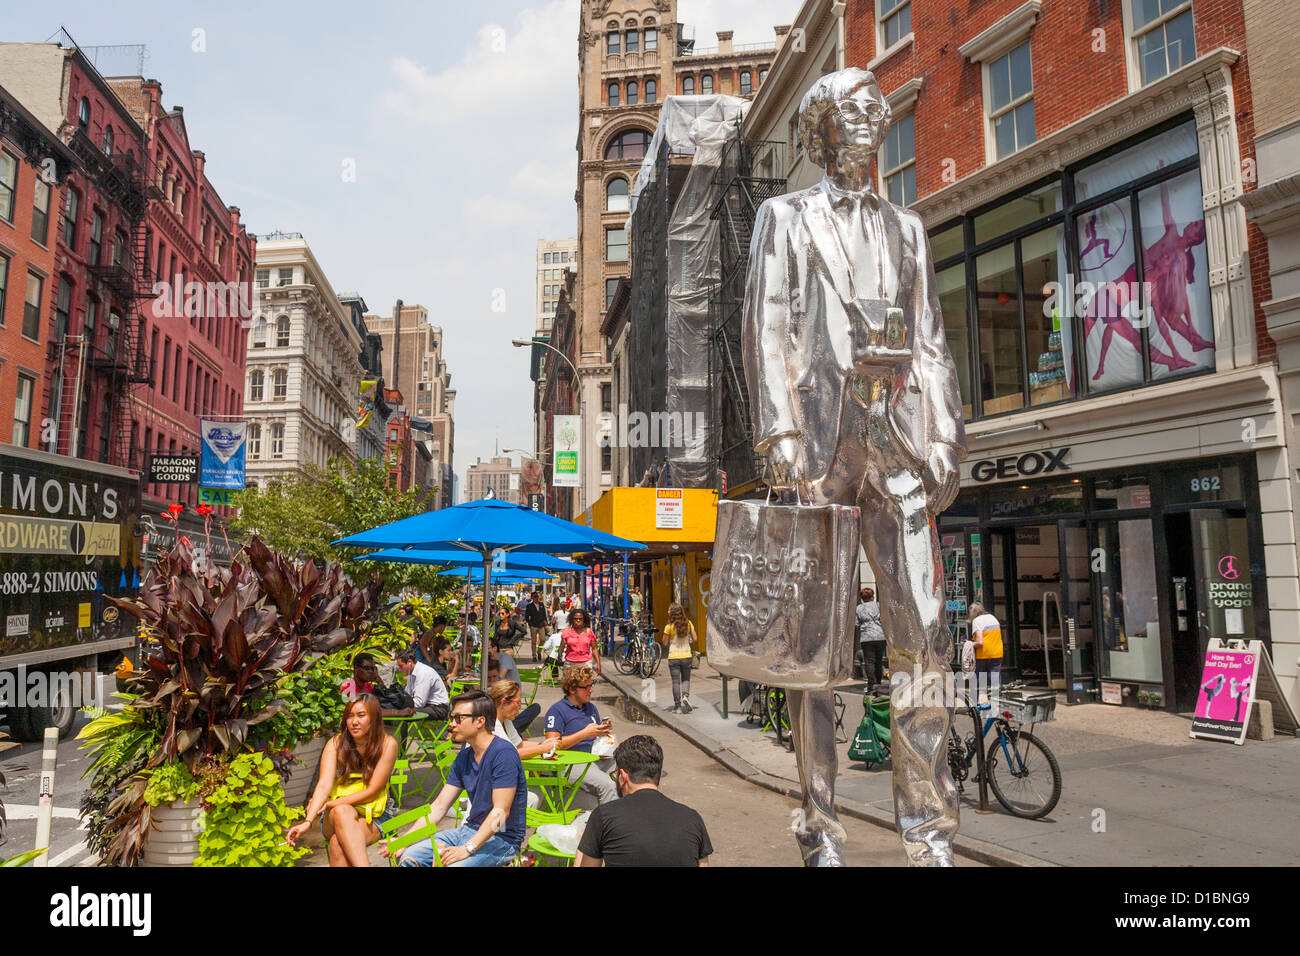 A statue of Andy Warhol on display in Union Square, New York City and surround by people sitting and relaxing. Stock Photo